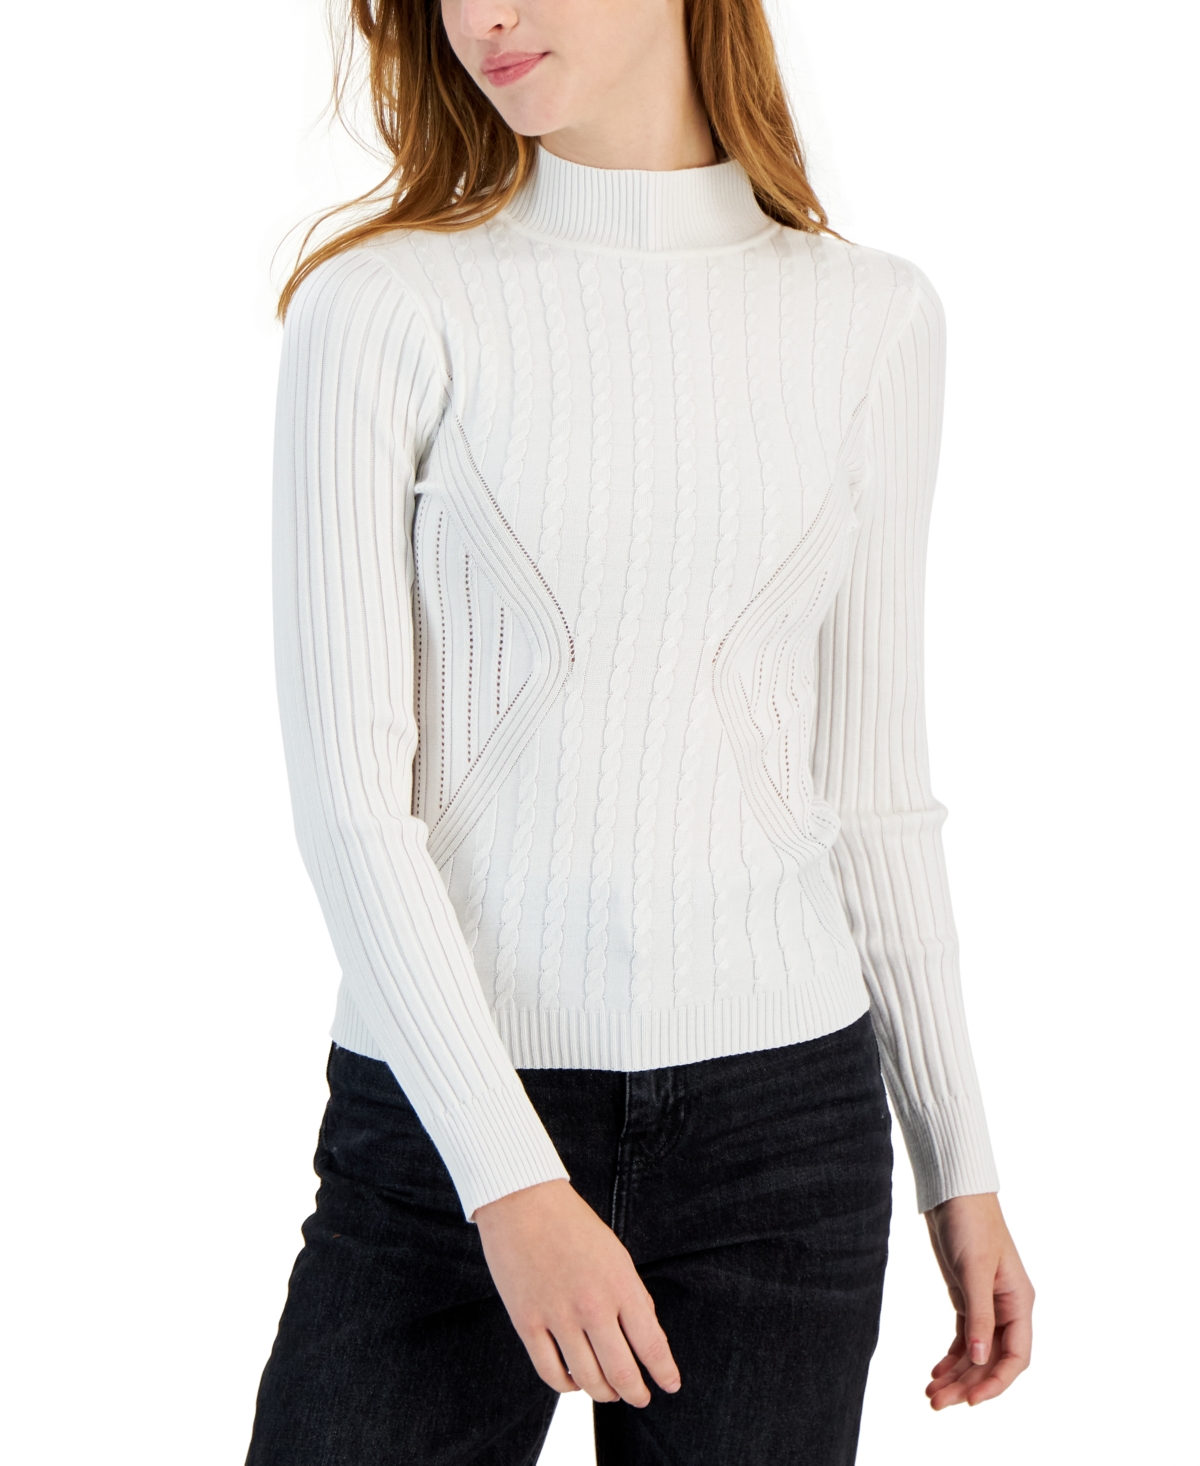 Crave Fame Juniors' Easy Mixed-Rib Mock-Neck Sweater